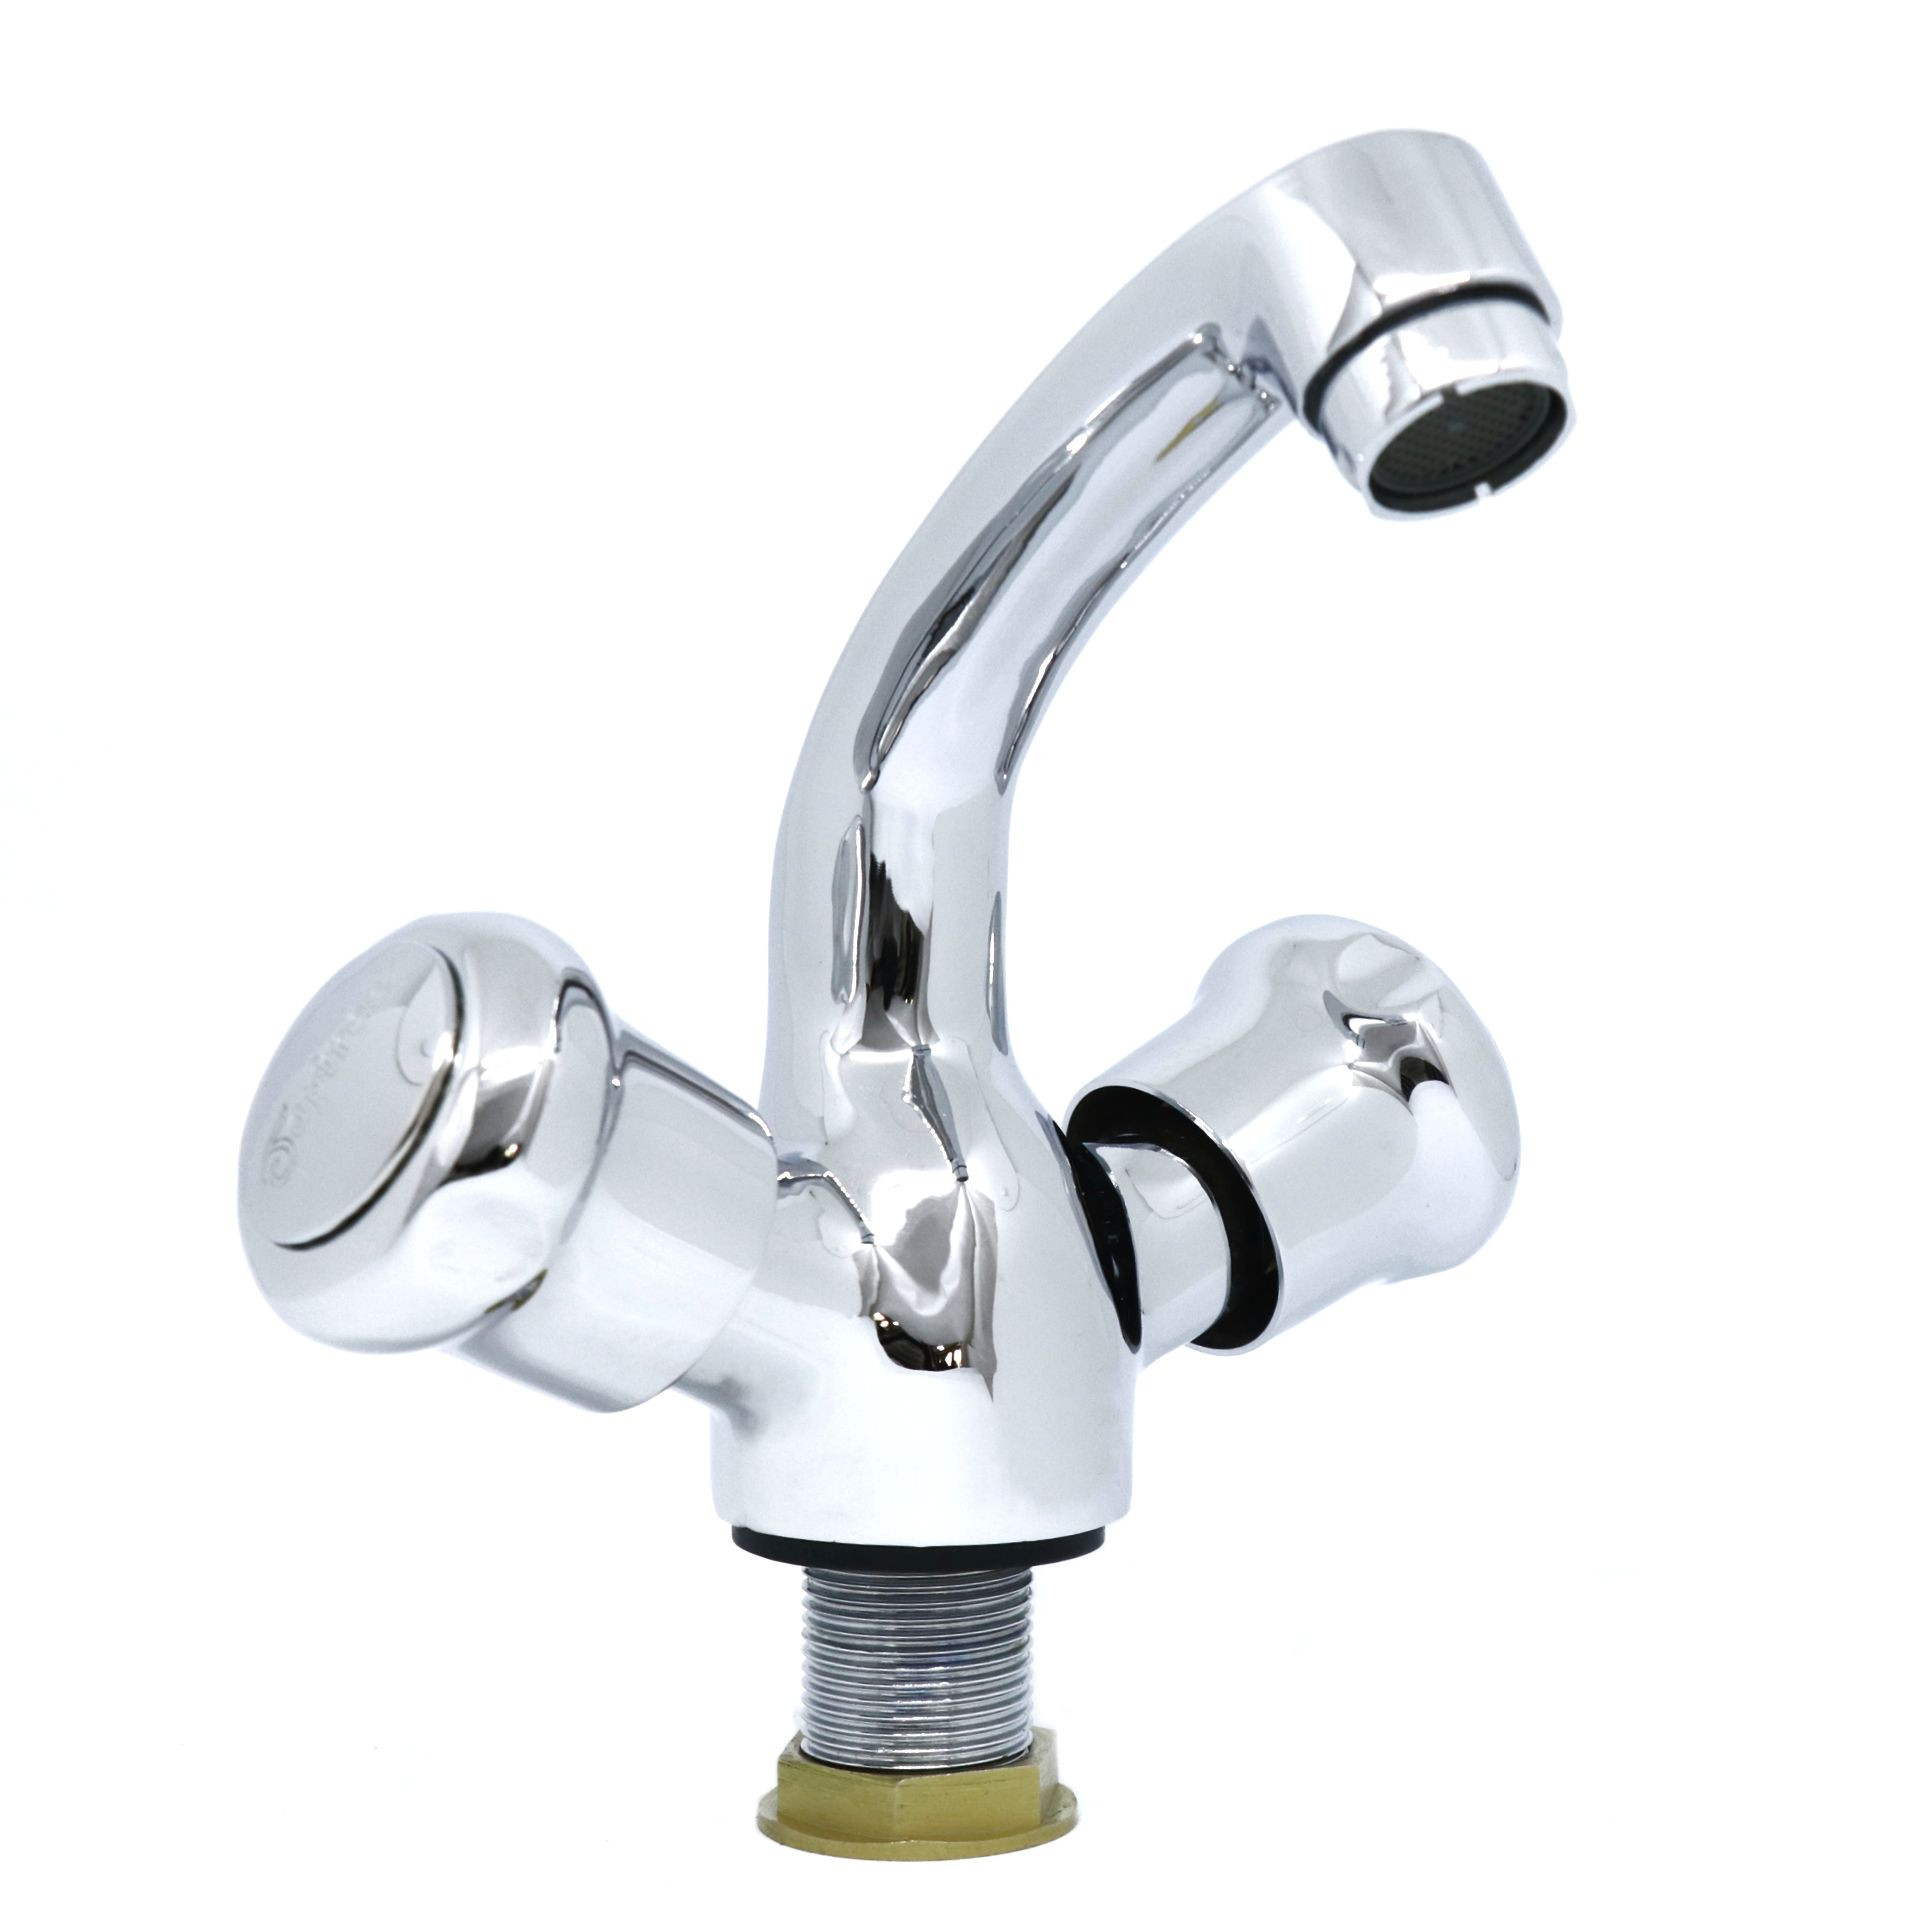 Price of Zephyr Basin Mixer- Club online in Nepal. || Online Shopping ...